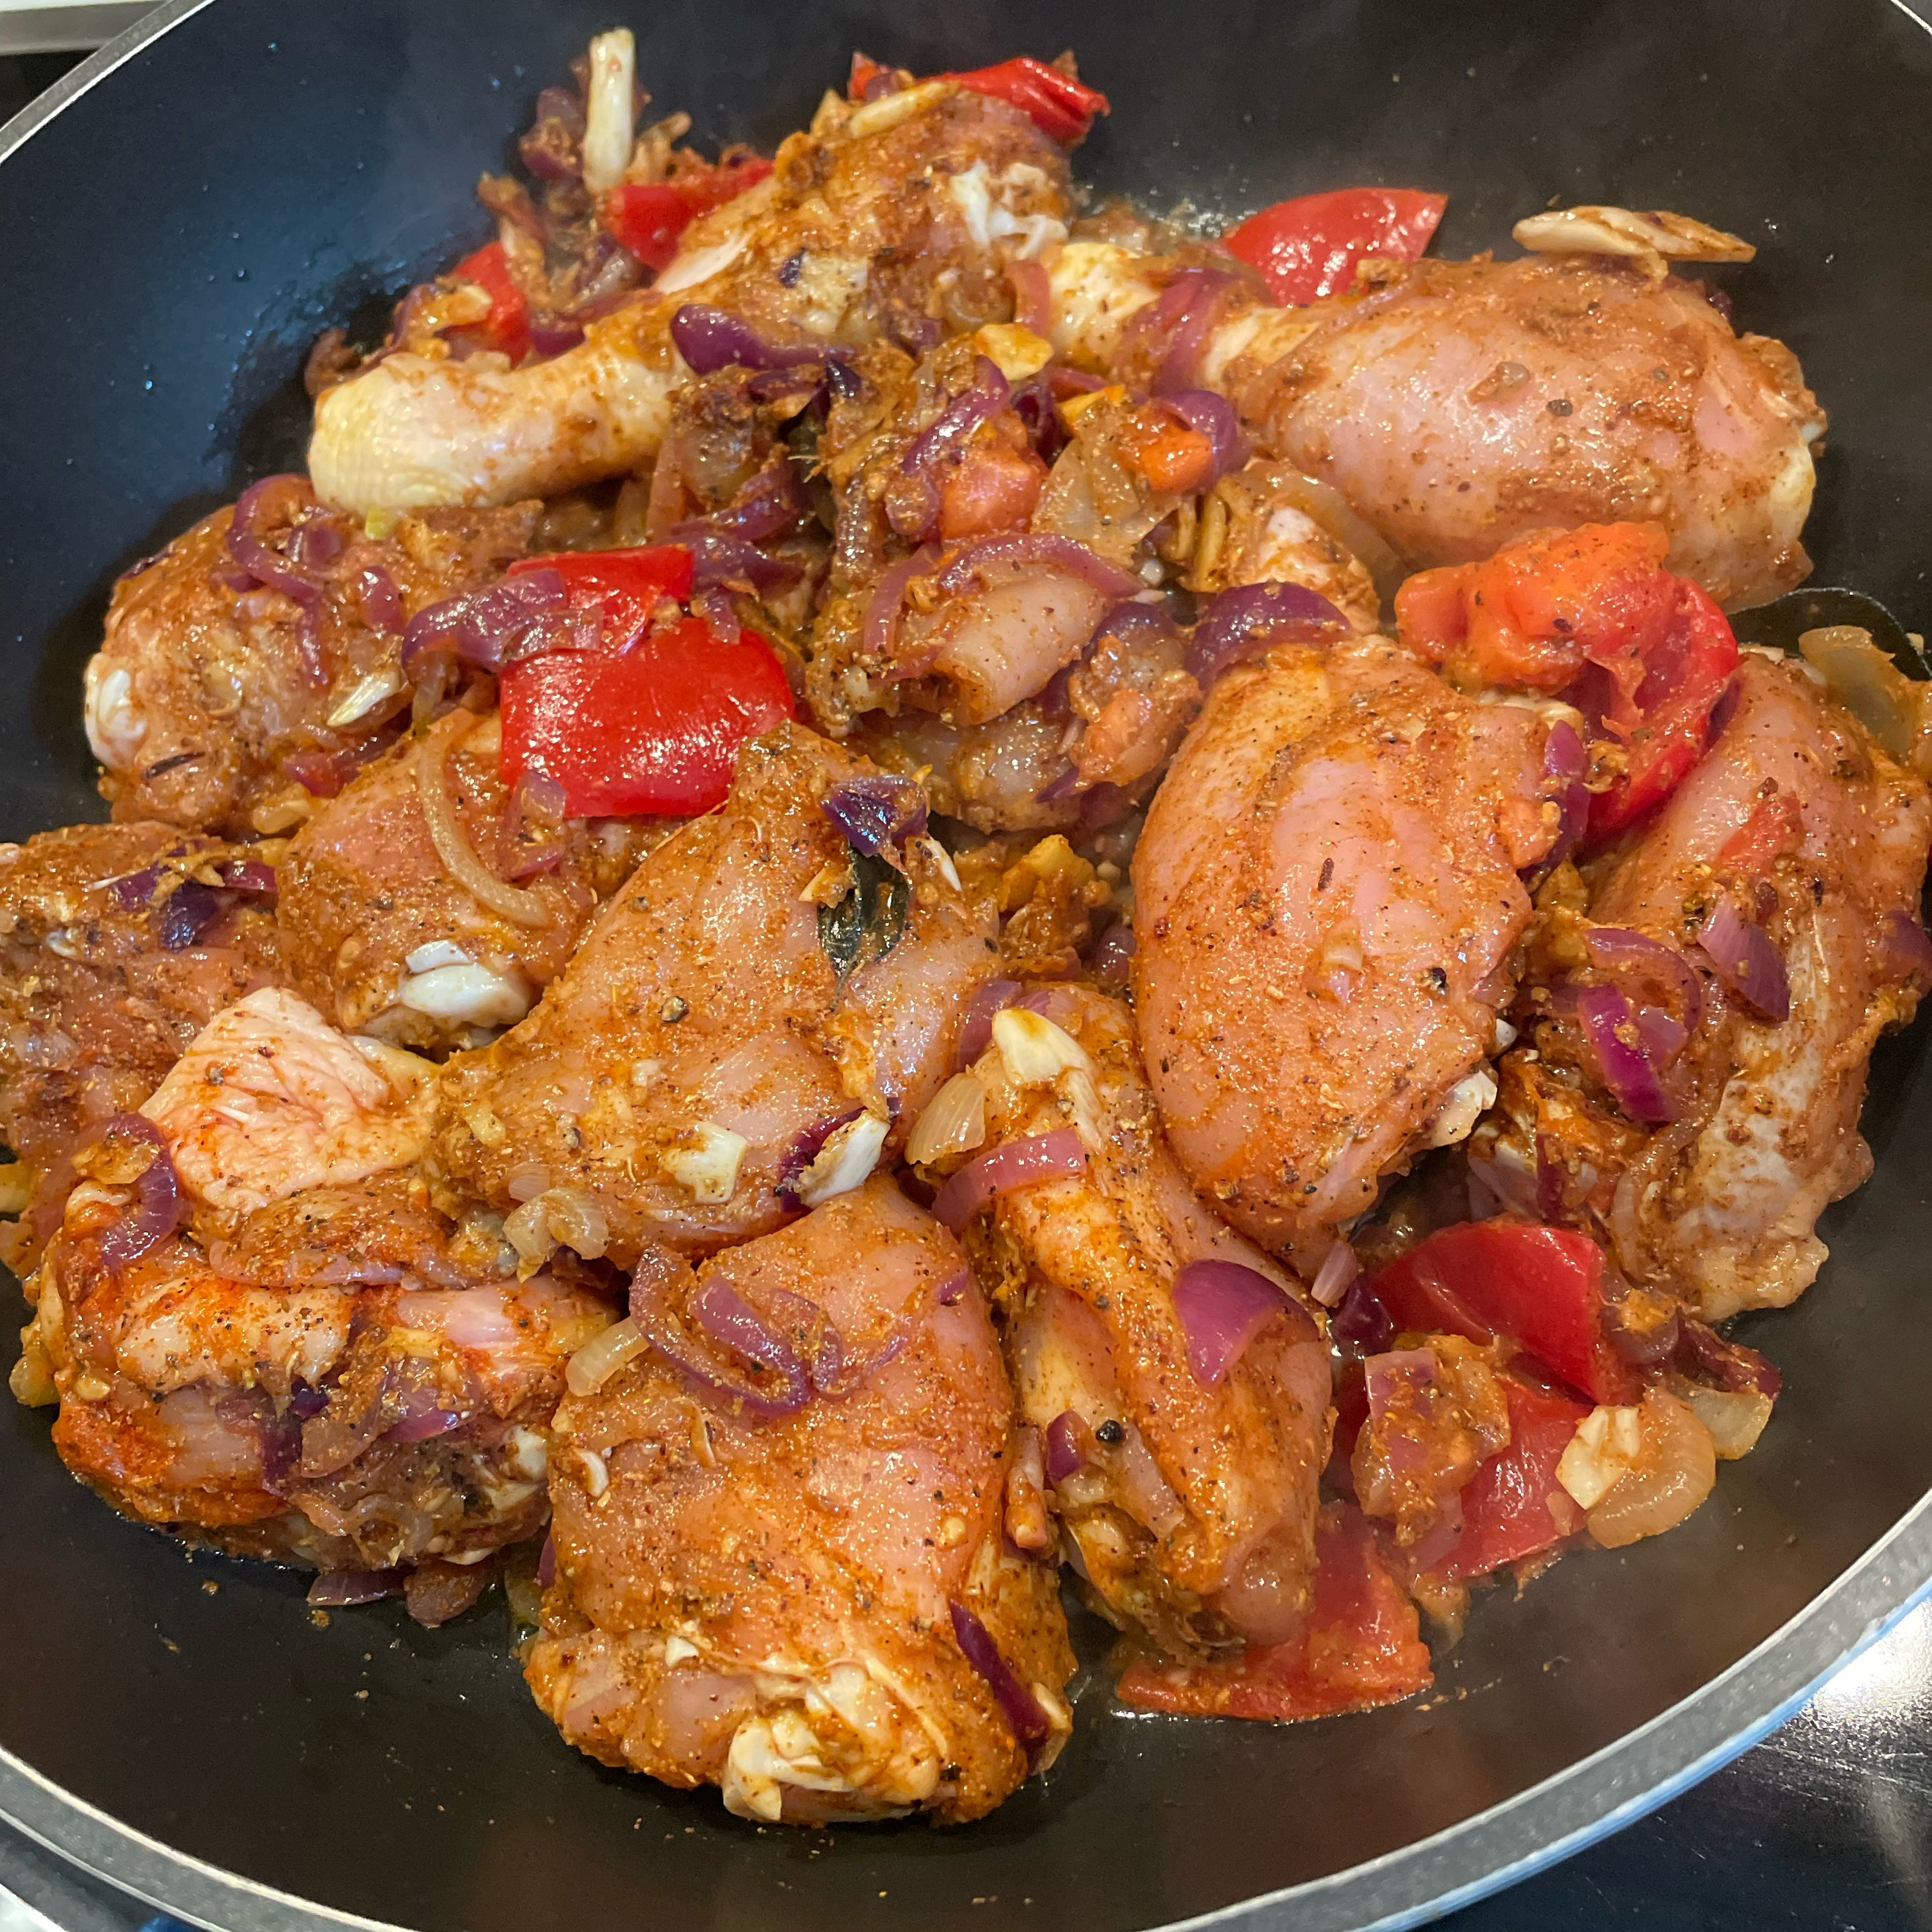 Heat up oil in the pan and add chicken to fry. Fry for 20-25min on medium heat until chicken is done.